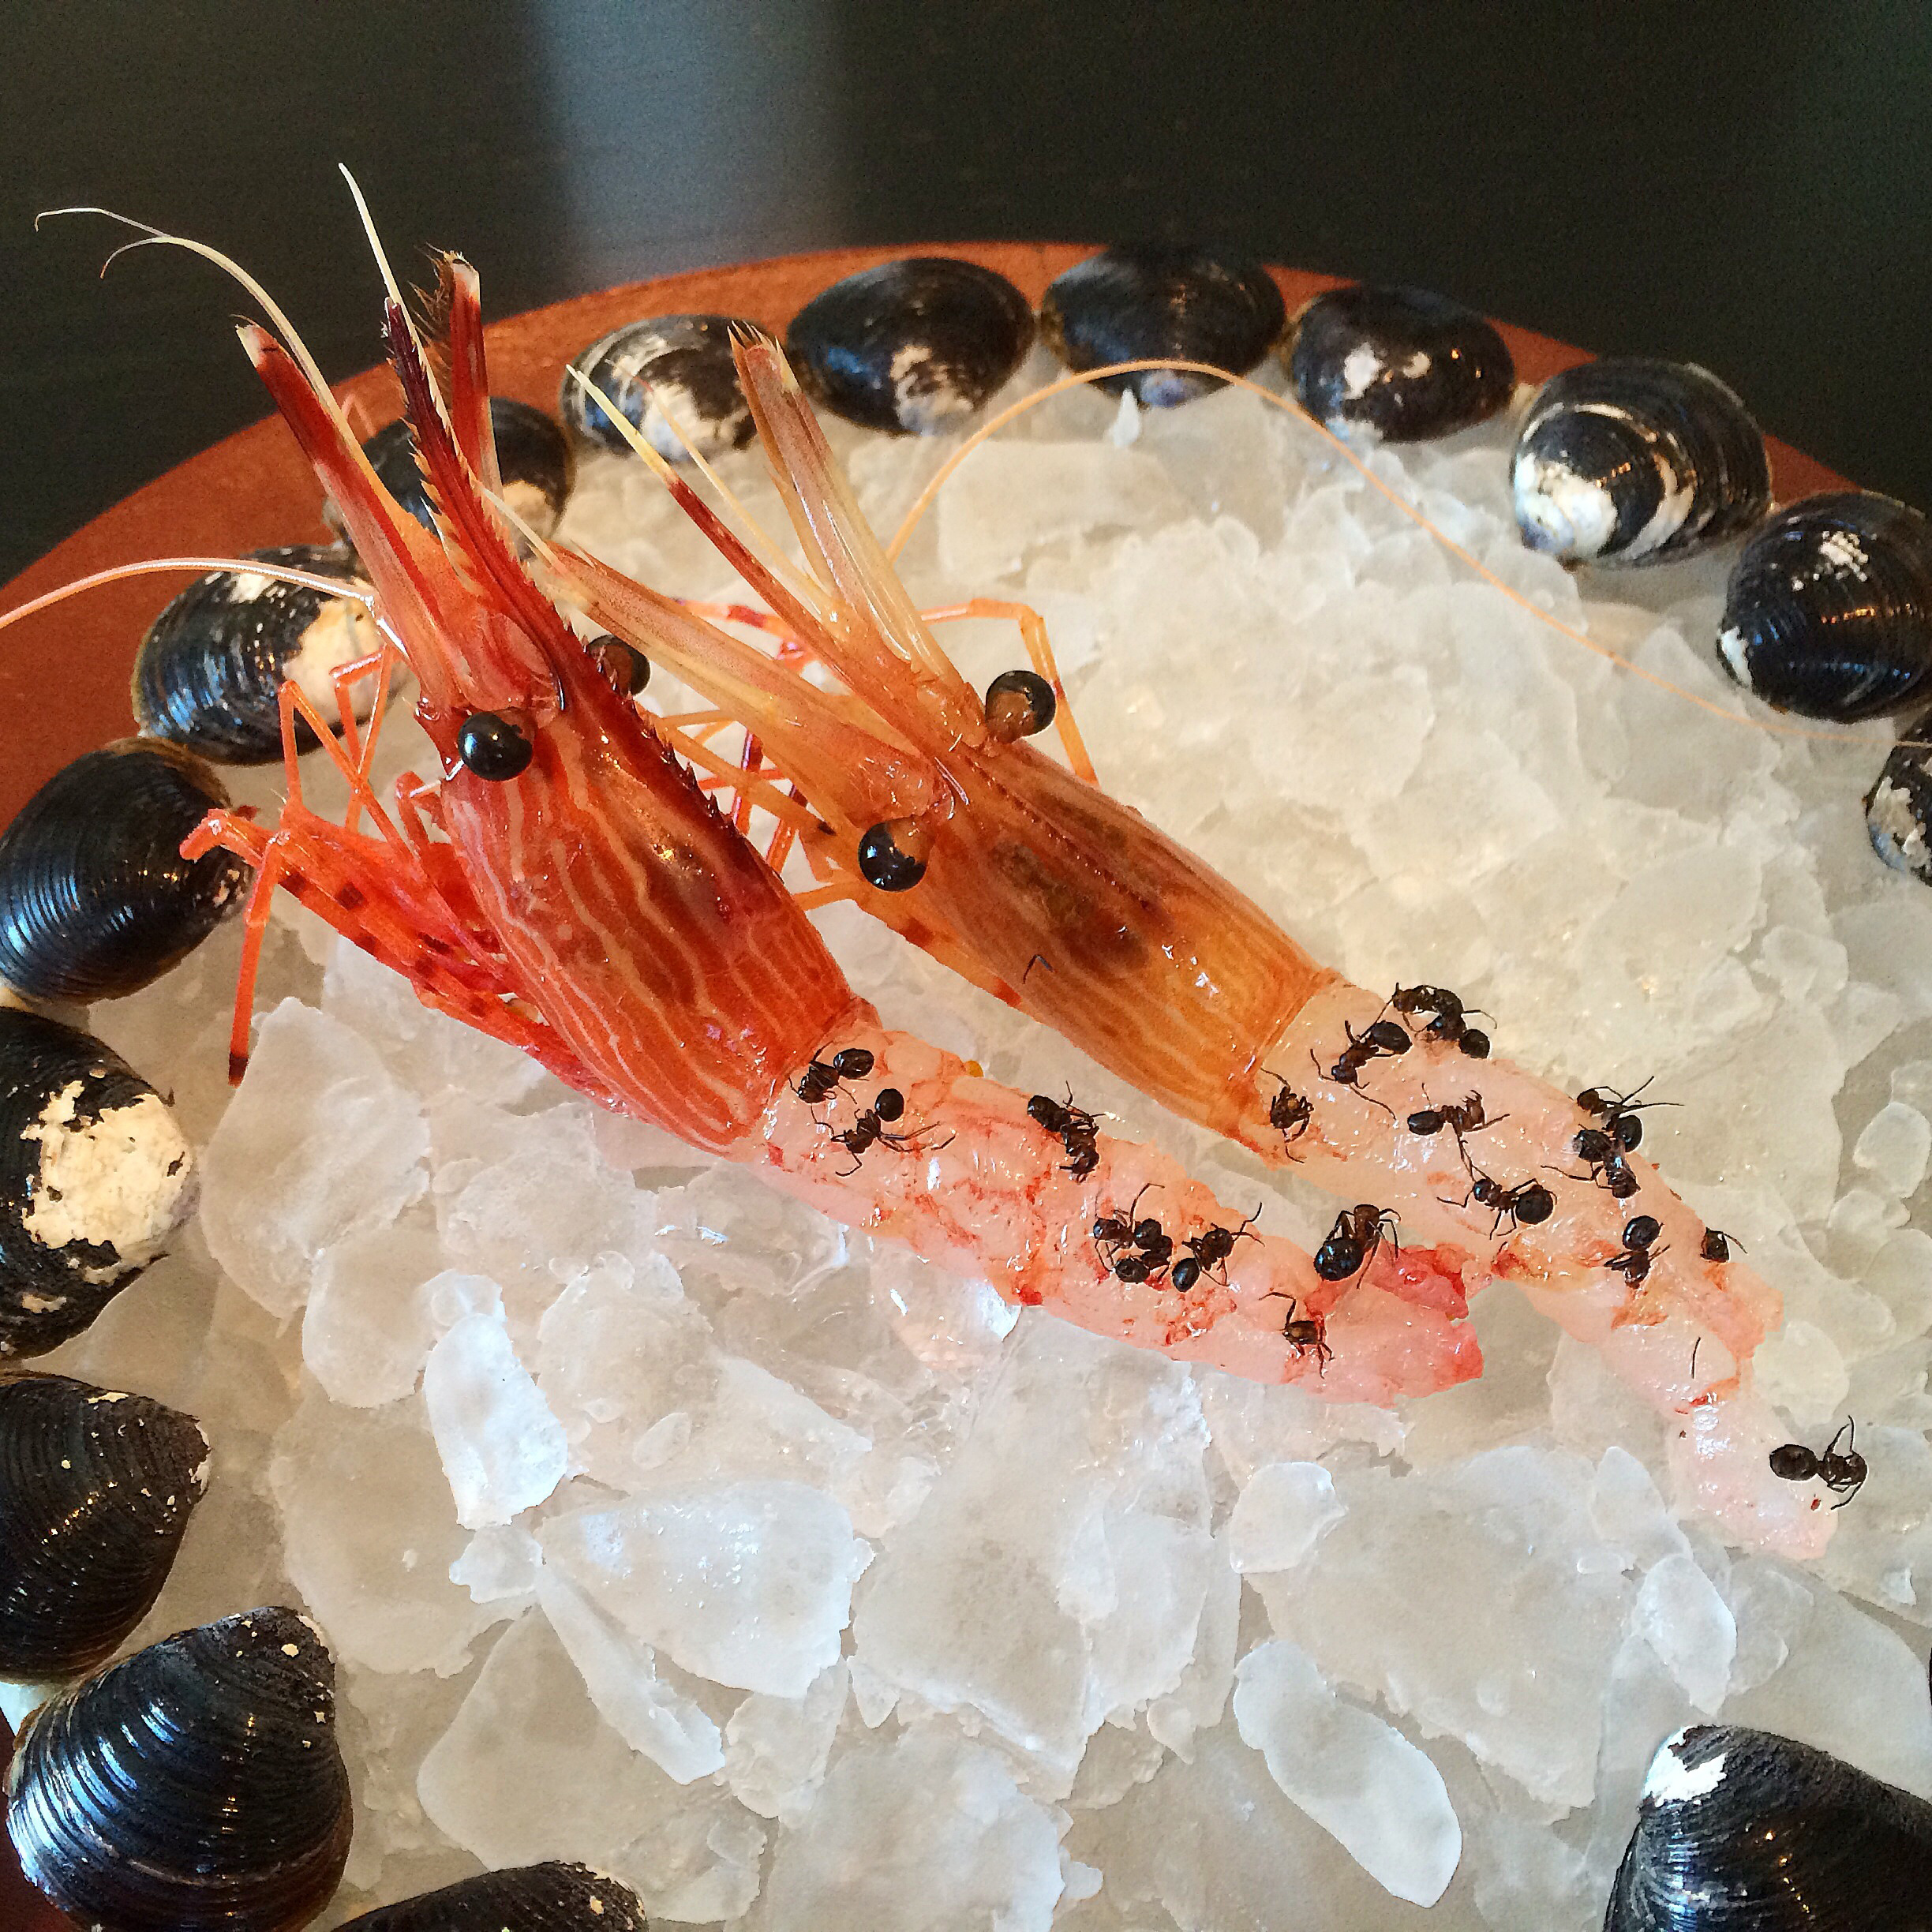 Jumbo shrimp with 'flavors of the Nagano forest' — otherwise known as ants — begin a series of courses at Noma Japan, which has taken up residence at the Mandarin Oriental hotel till Feb. 14. | ROBBIE SWINNERTON